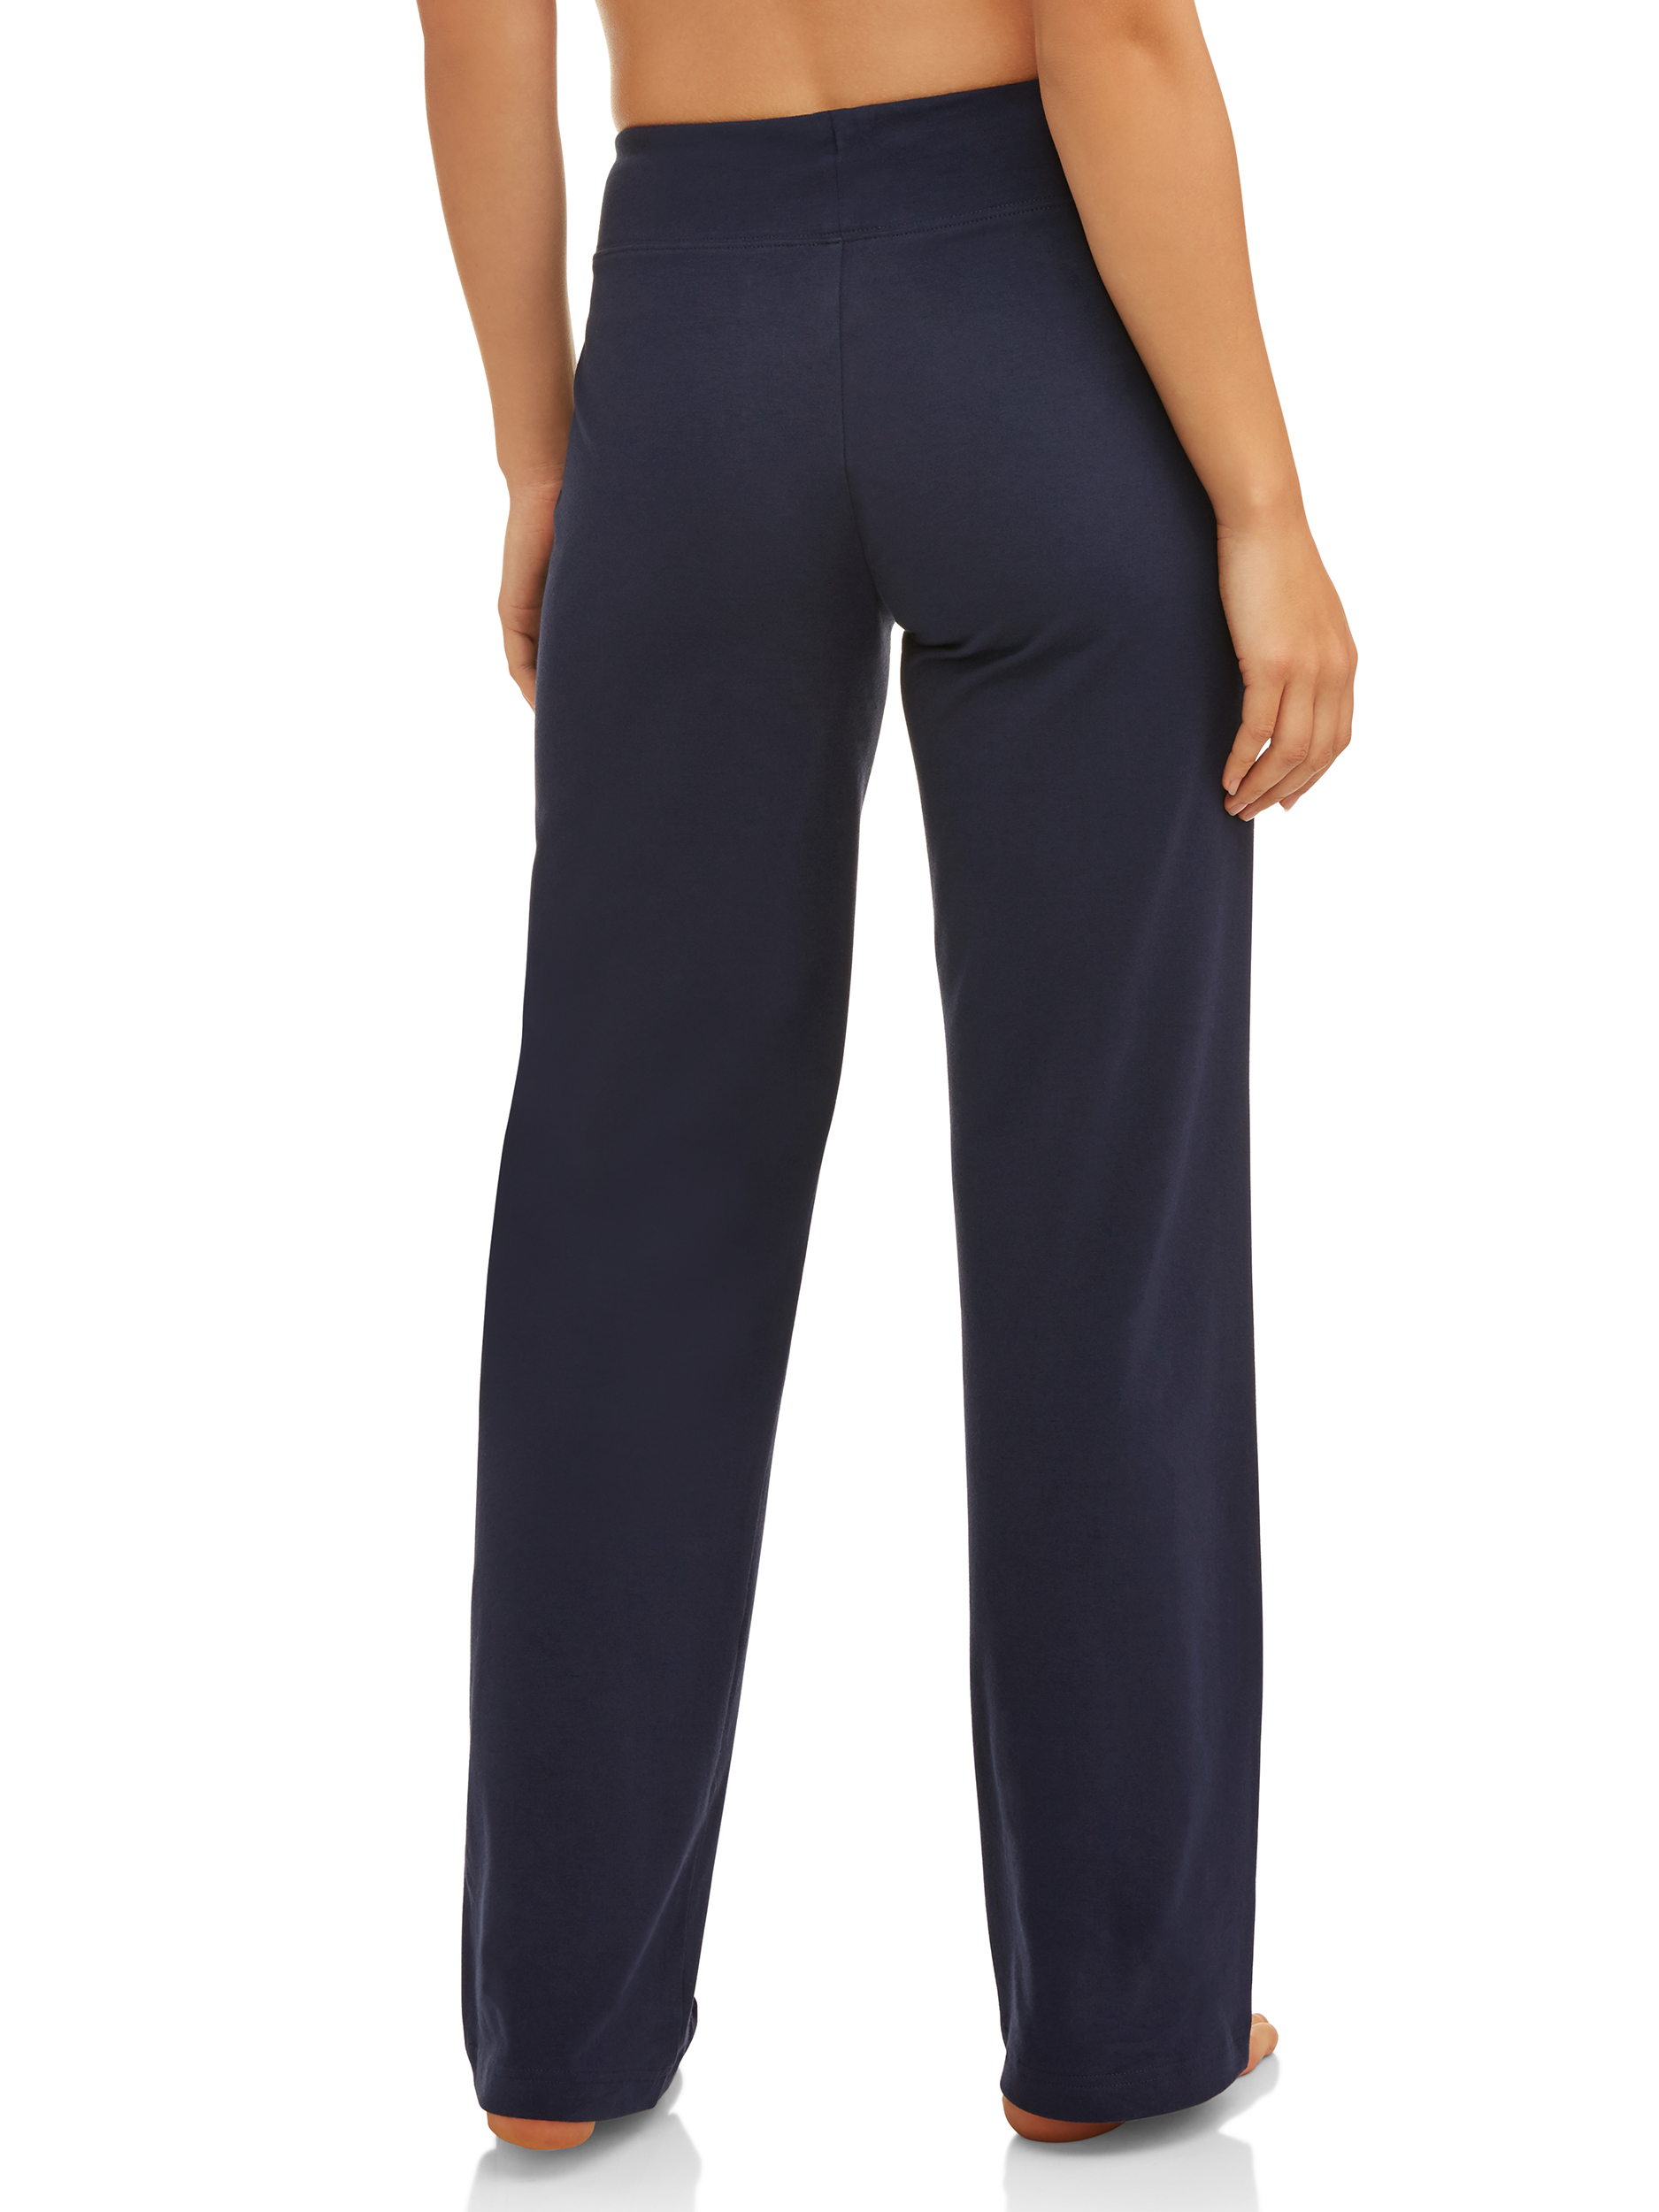 Athletic Works Women's and Women's Plus  Dri-More Core Relaxed Fit Yoga Pants - image 3 of 3